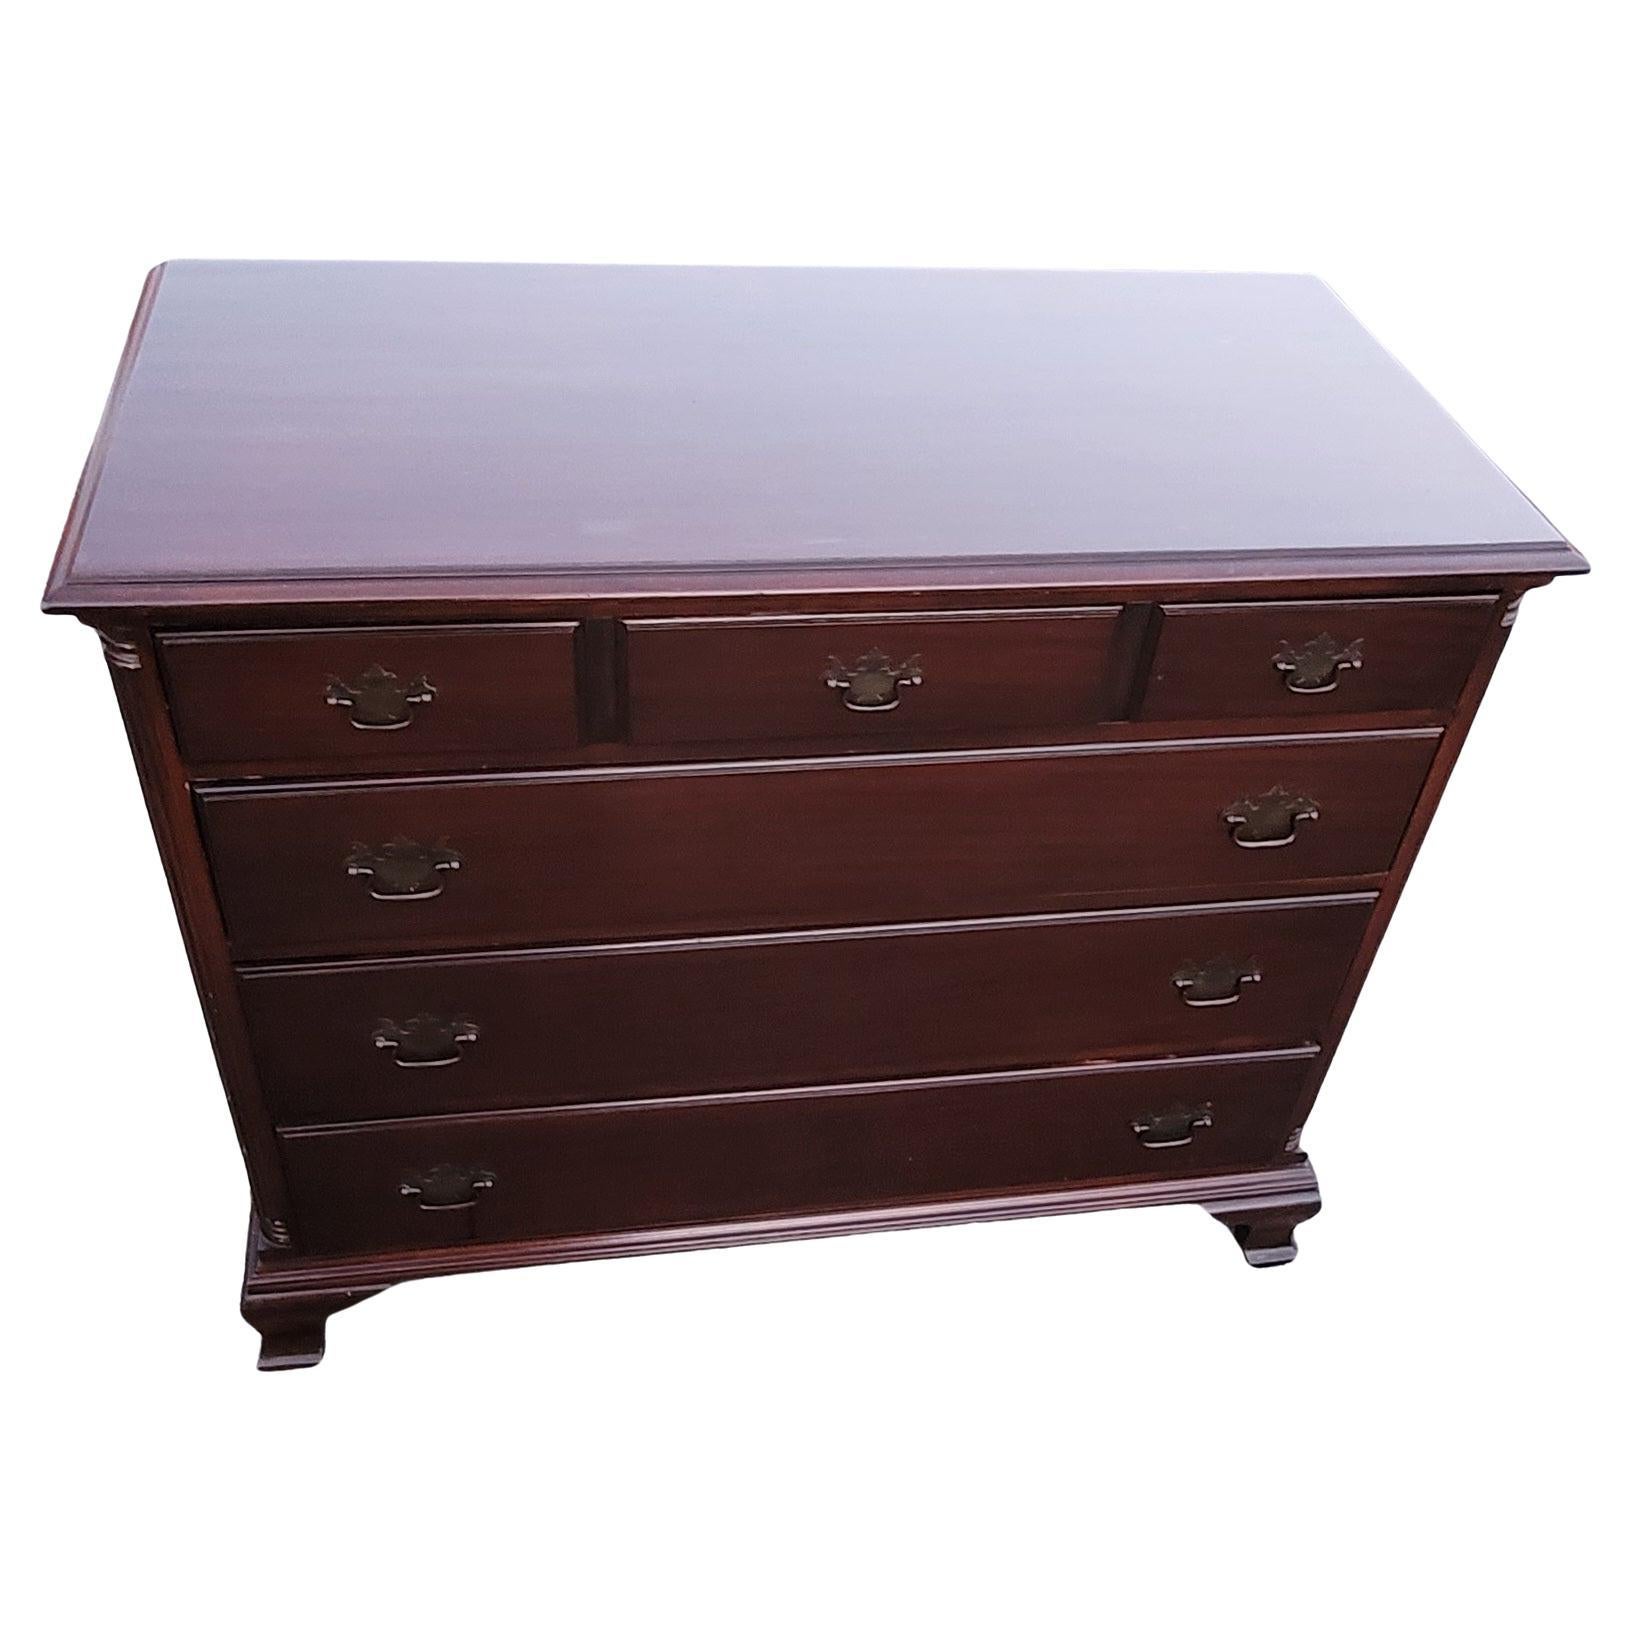 English Chippendale Mahogany Commode Chest of Drawers. Features 4 large drawers functioning to perfection with dovetailed joints. Measures 44